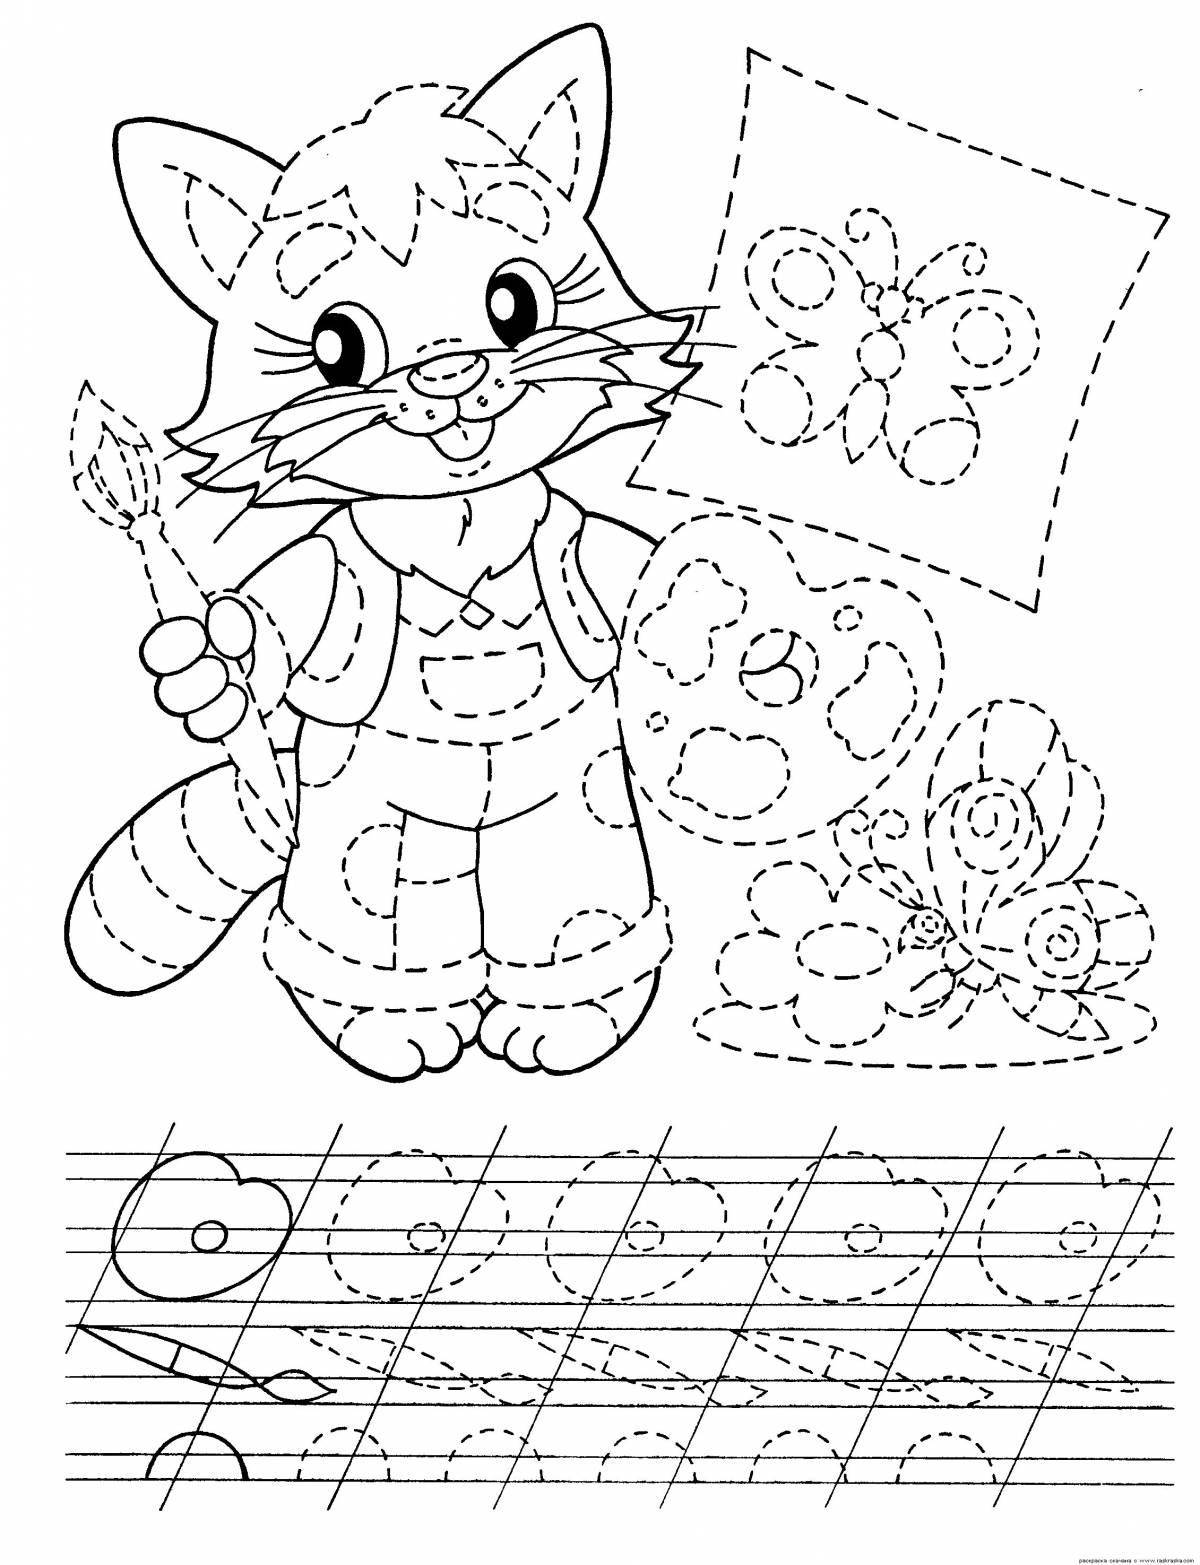 Colorful-inspiring coloring page grade 0